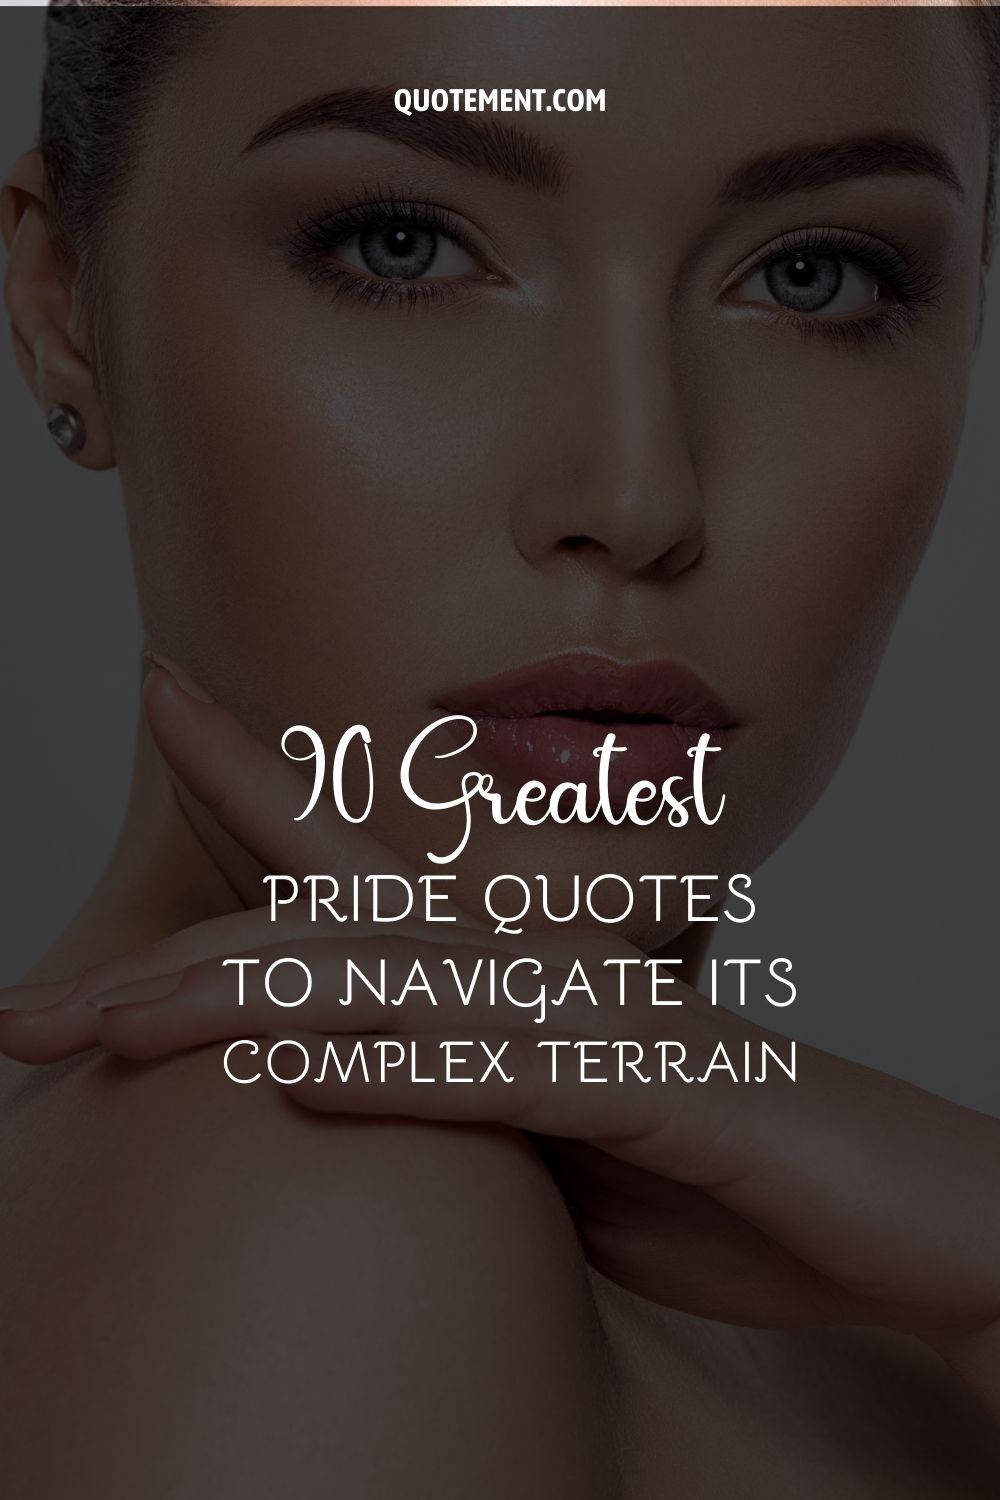 90 Greatest Pride Quotes To Navigate Its Complex Terrain